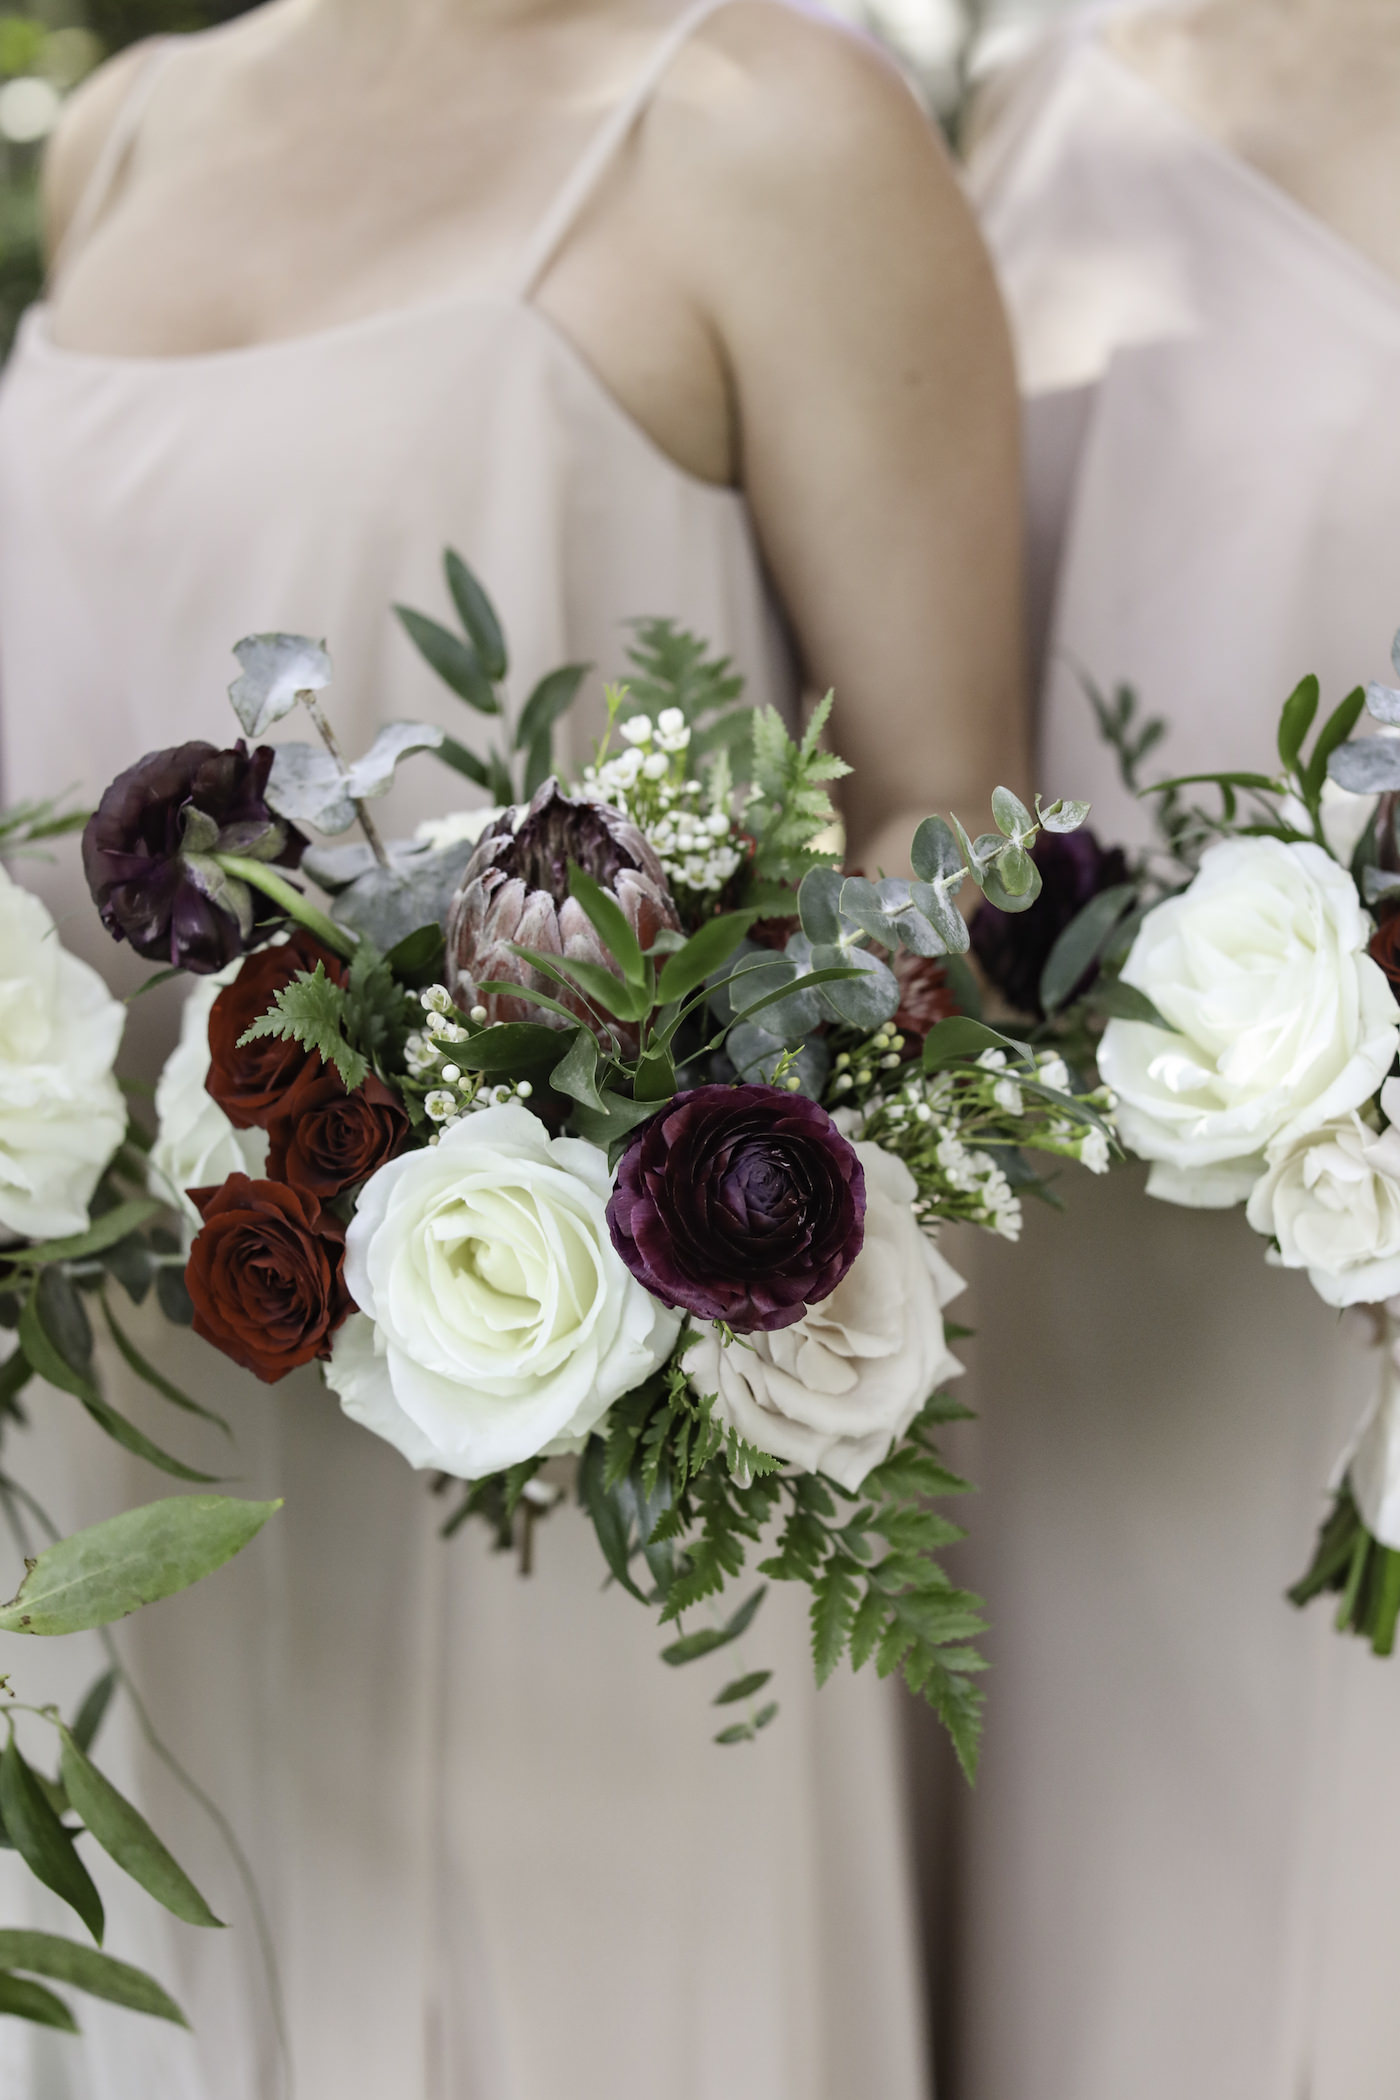 Bridesmaids in Neutral Nude Dress Holding Dark Purple, White and Red Roses with Greenery Floral Bouquet | Wedding Photographer Lifelong Photography Studio | Tampa Bay Wedding Planner Blue Skies Weddings and Events